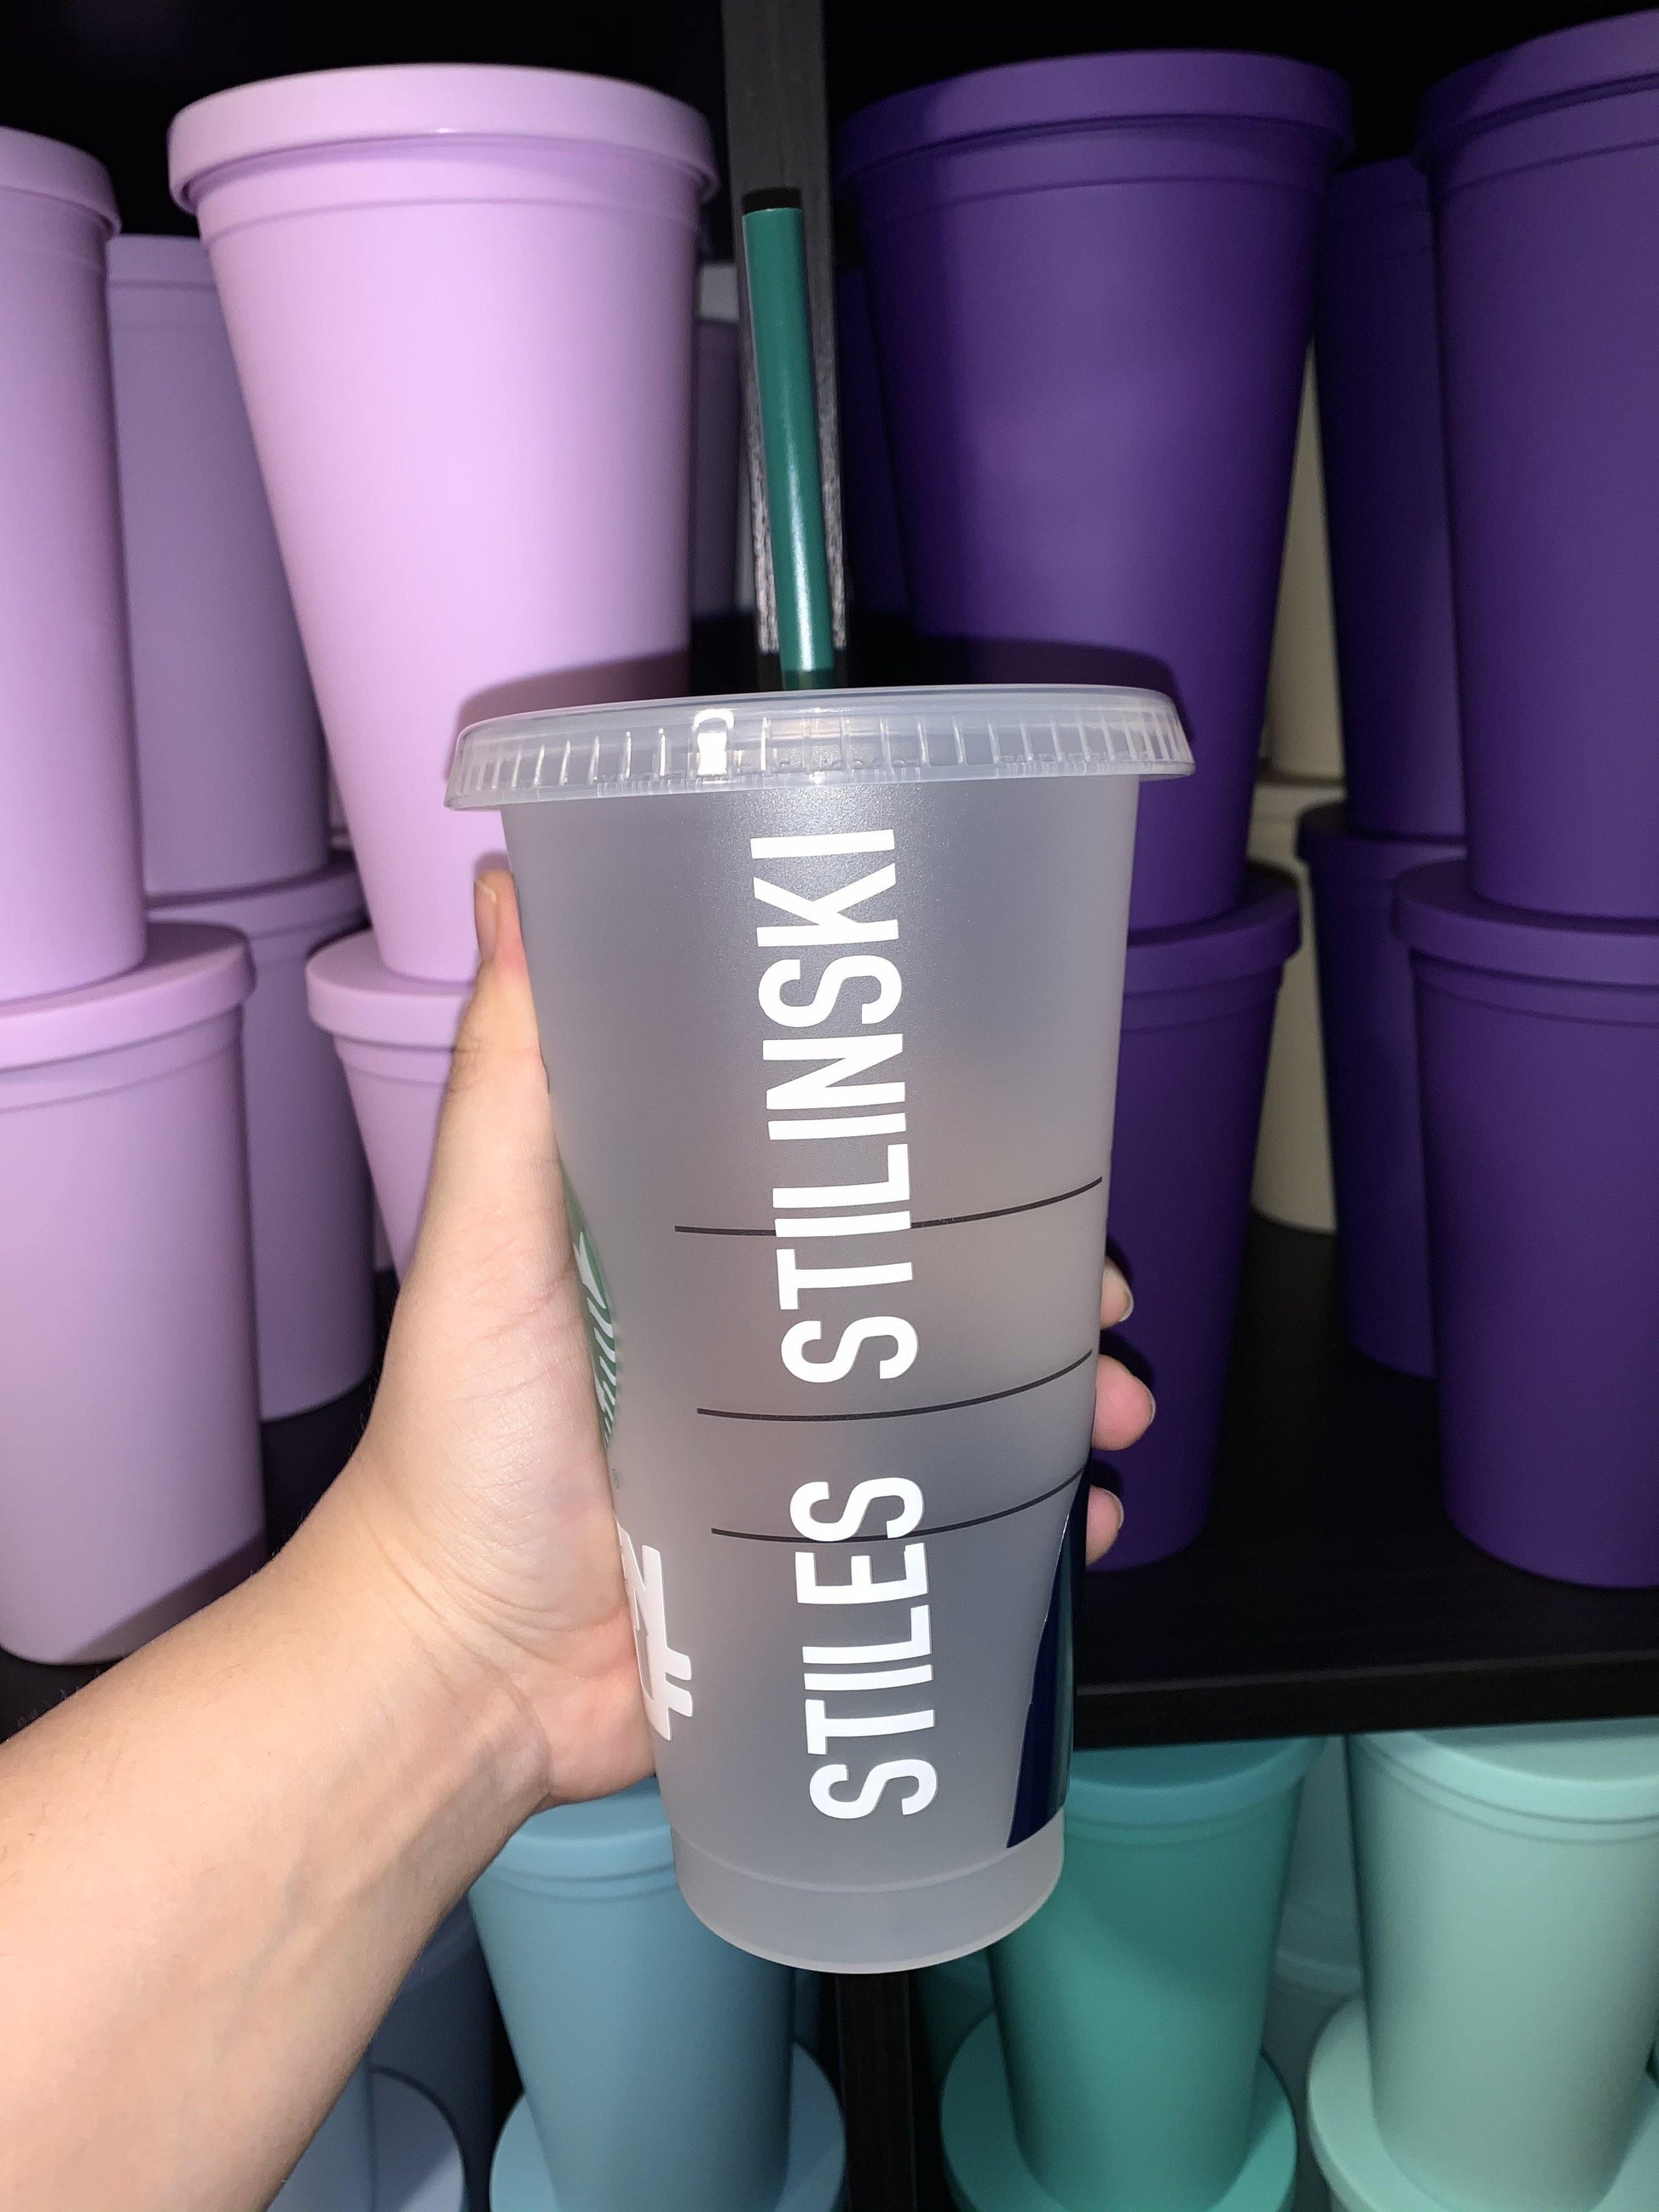 Teen Wolf Stiles Stilinski Starbucks Frosted Cup. Custom Starbucks Hot and Cold cups. Choose from over 100 designs and colour combinations or customize your own. Toronto, ON, Canada. Ship Worldwide. TV Shows. Dylan O'Brien.